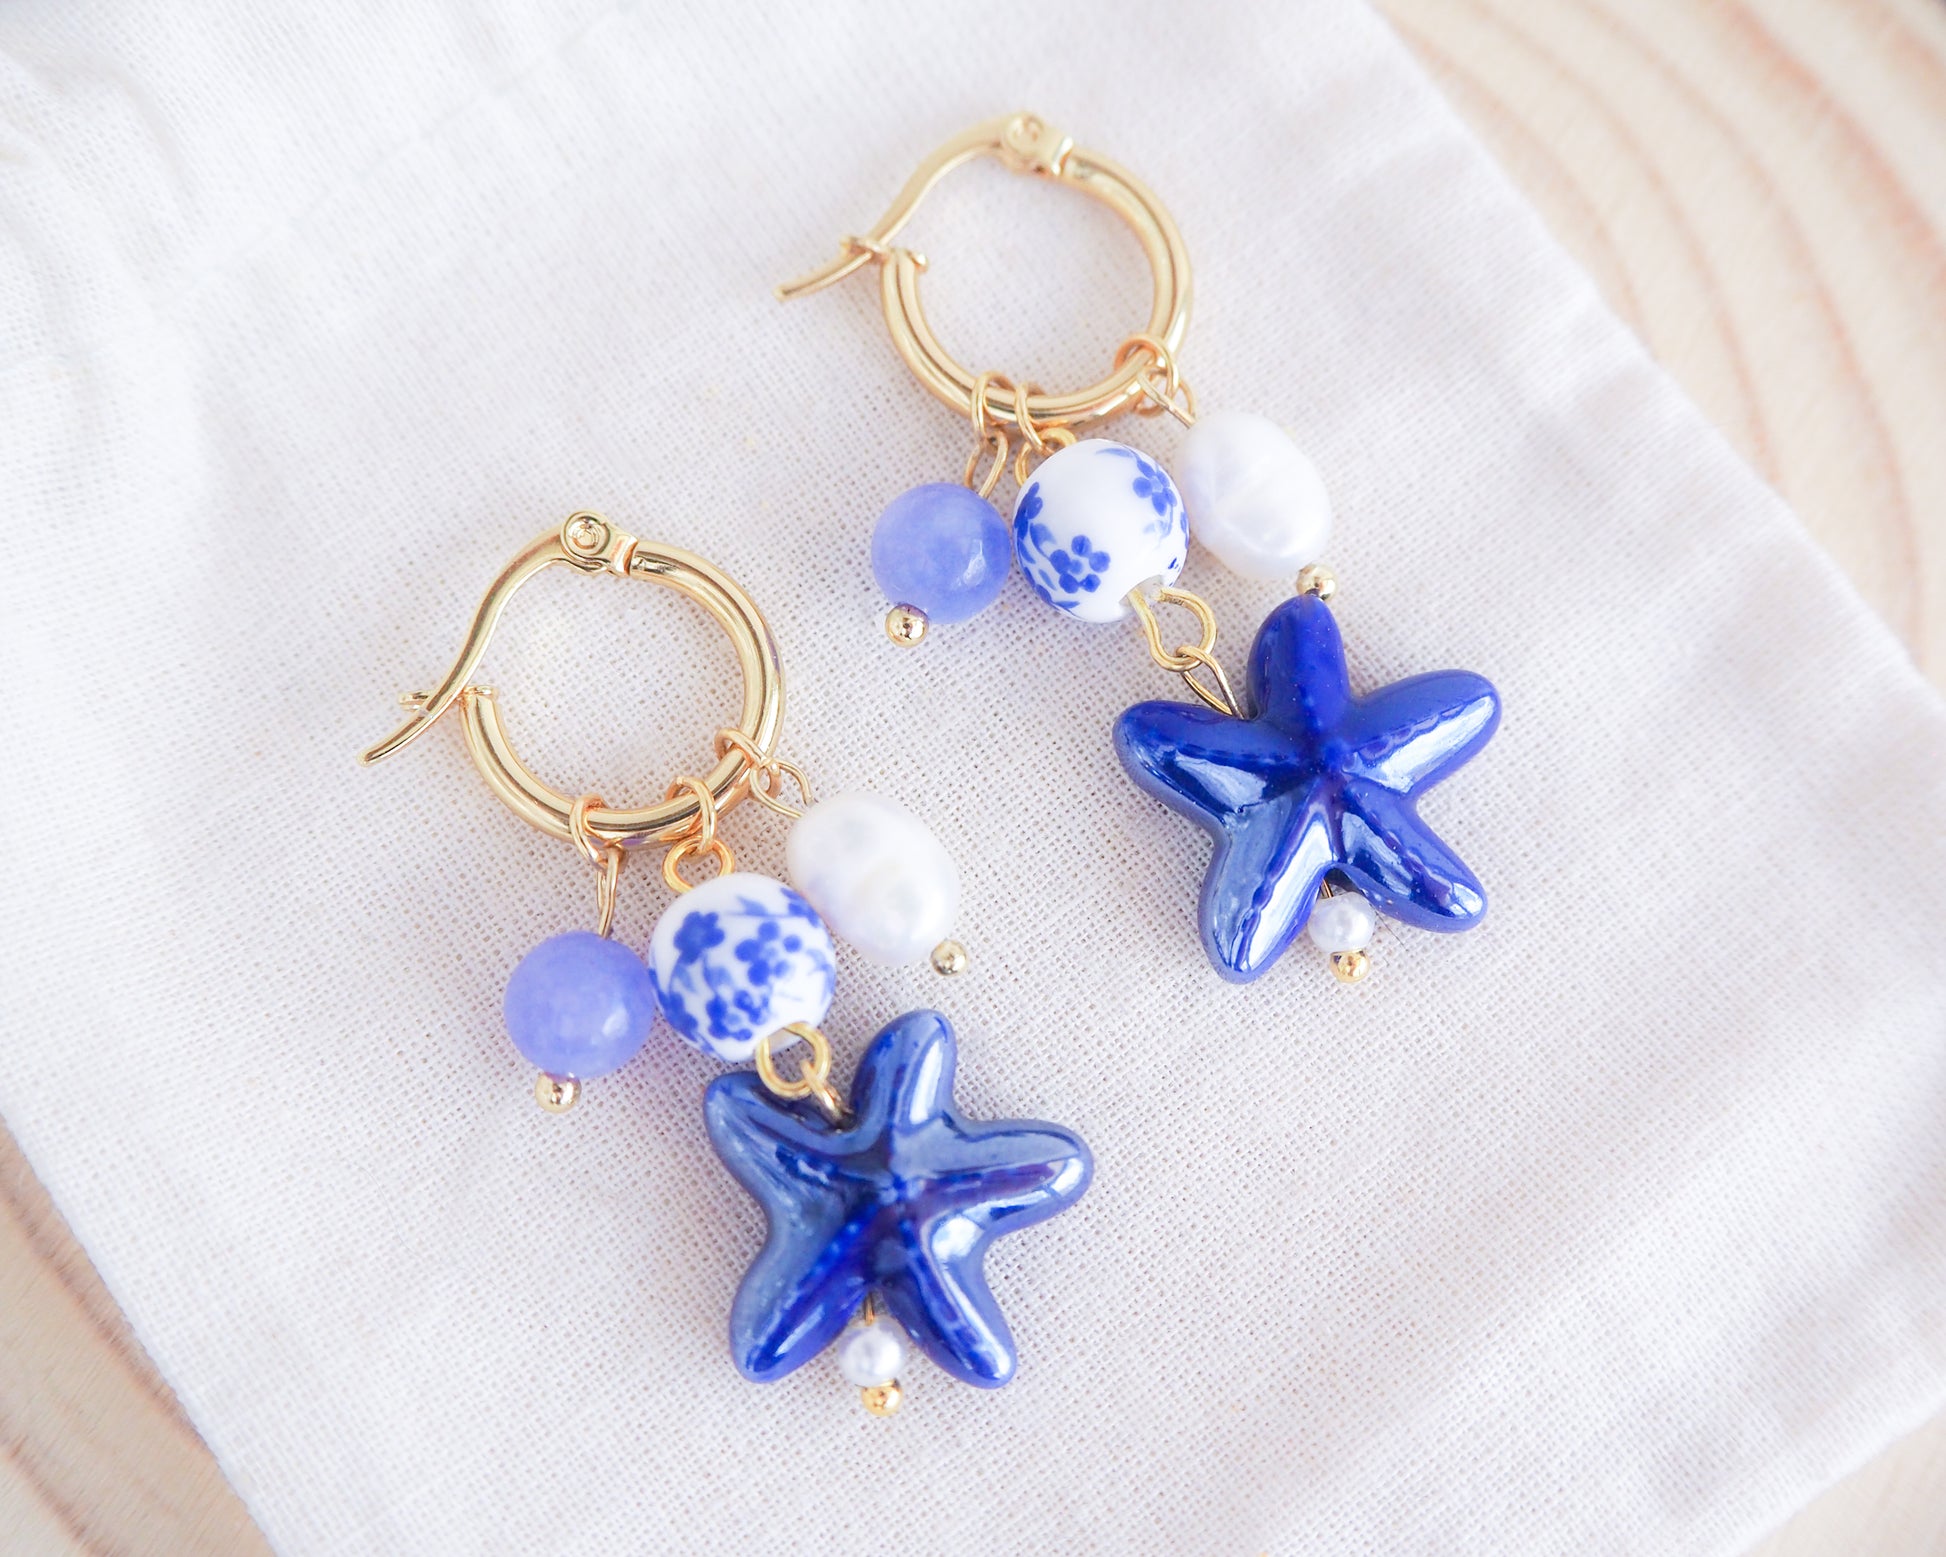 Portuguese Blue Sea Star  Starfish Gold Earrings with Azulejo Tile Beads, Freshwater Pearls and Gemstones - Handmade Ocean Inspired Jewelry